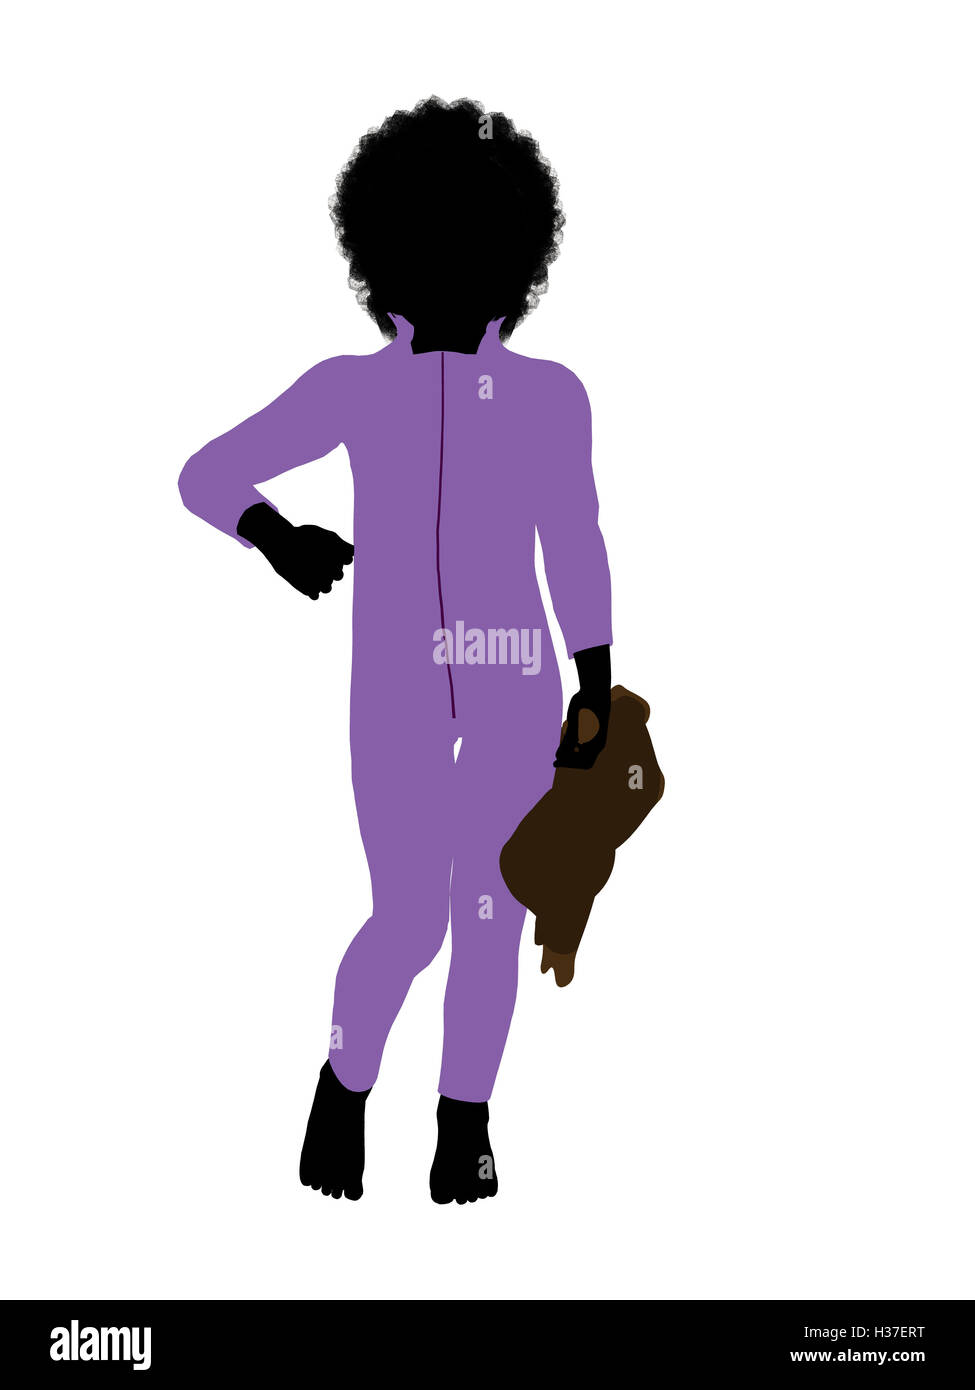 Peter of Peter Pan Silhouette Illustration Stock Photo